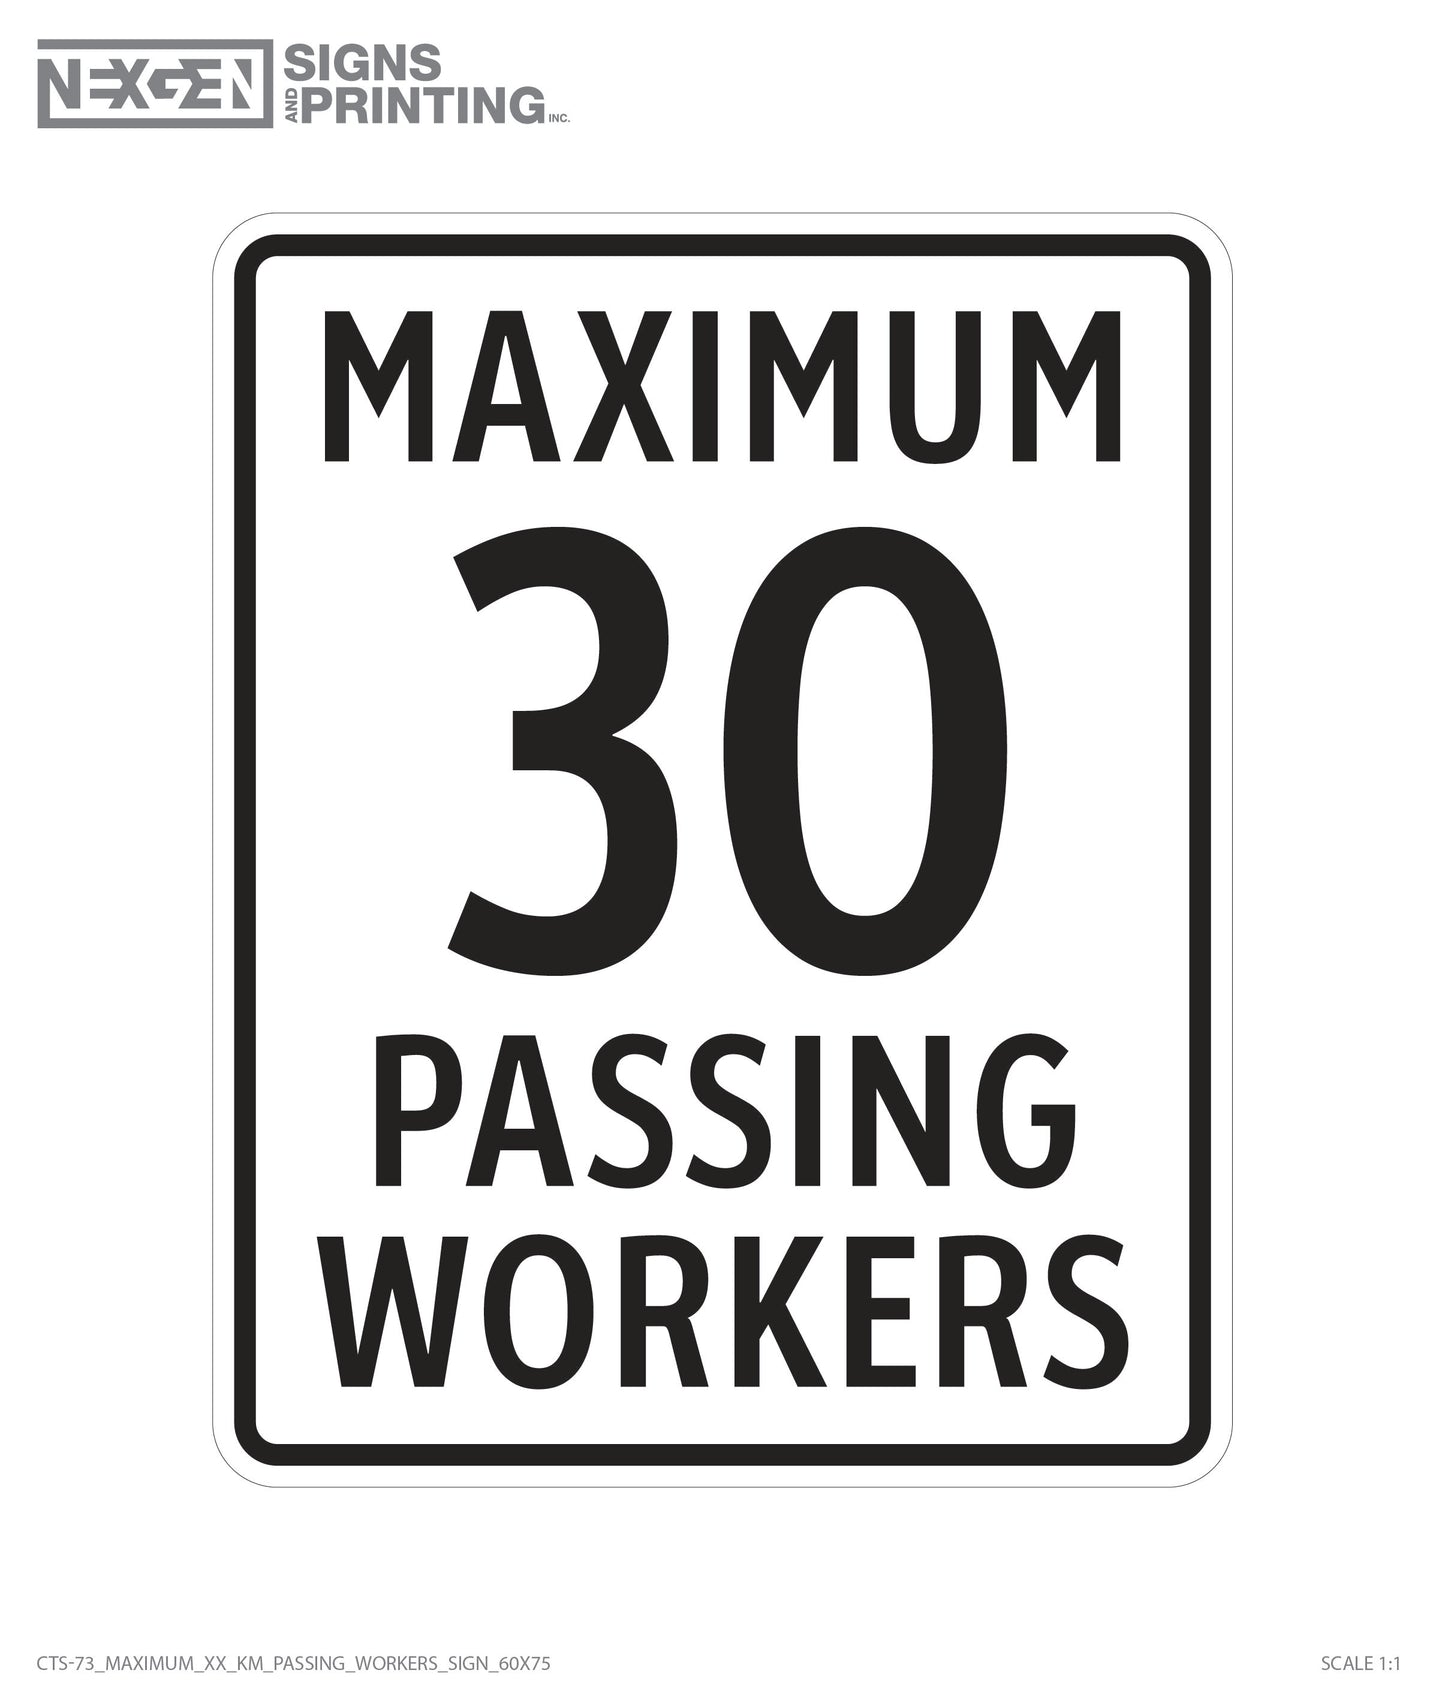 CTS-73 Maximum XX KM Passing Workers